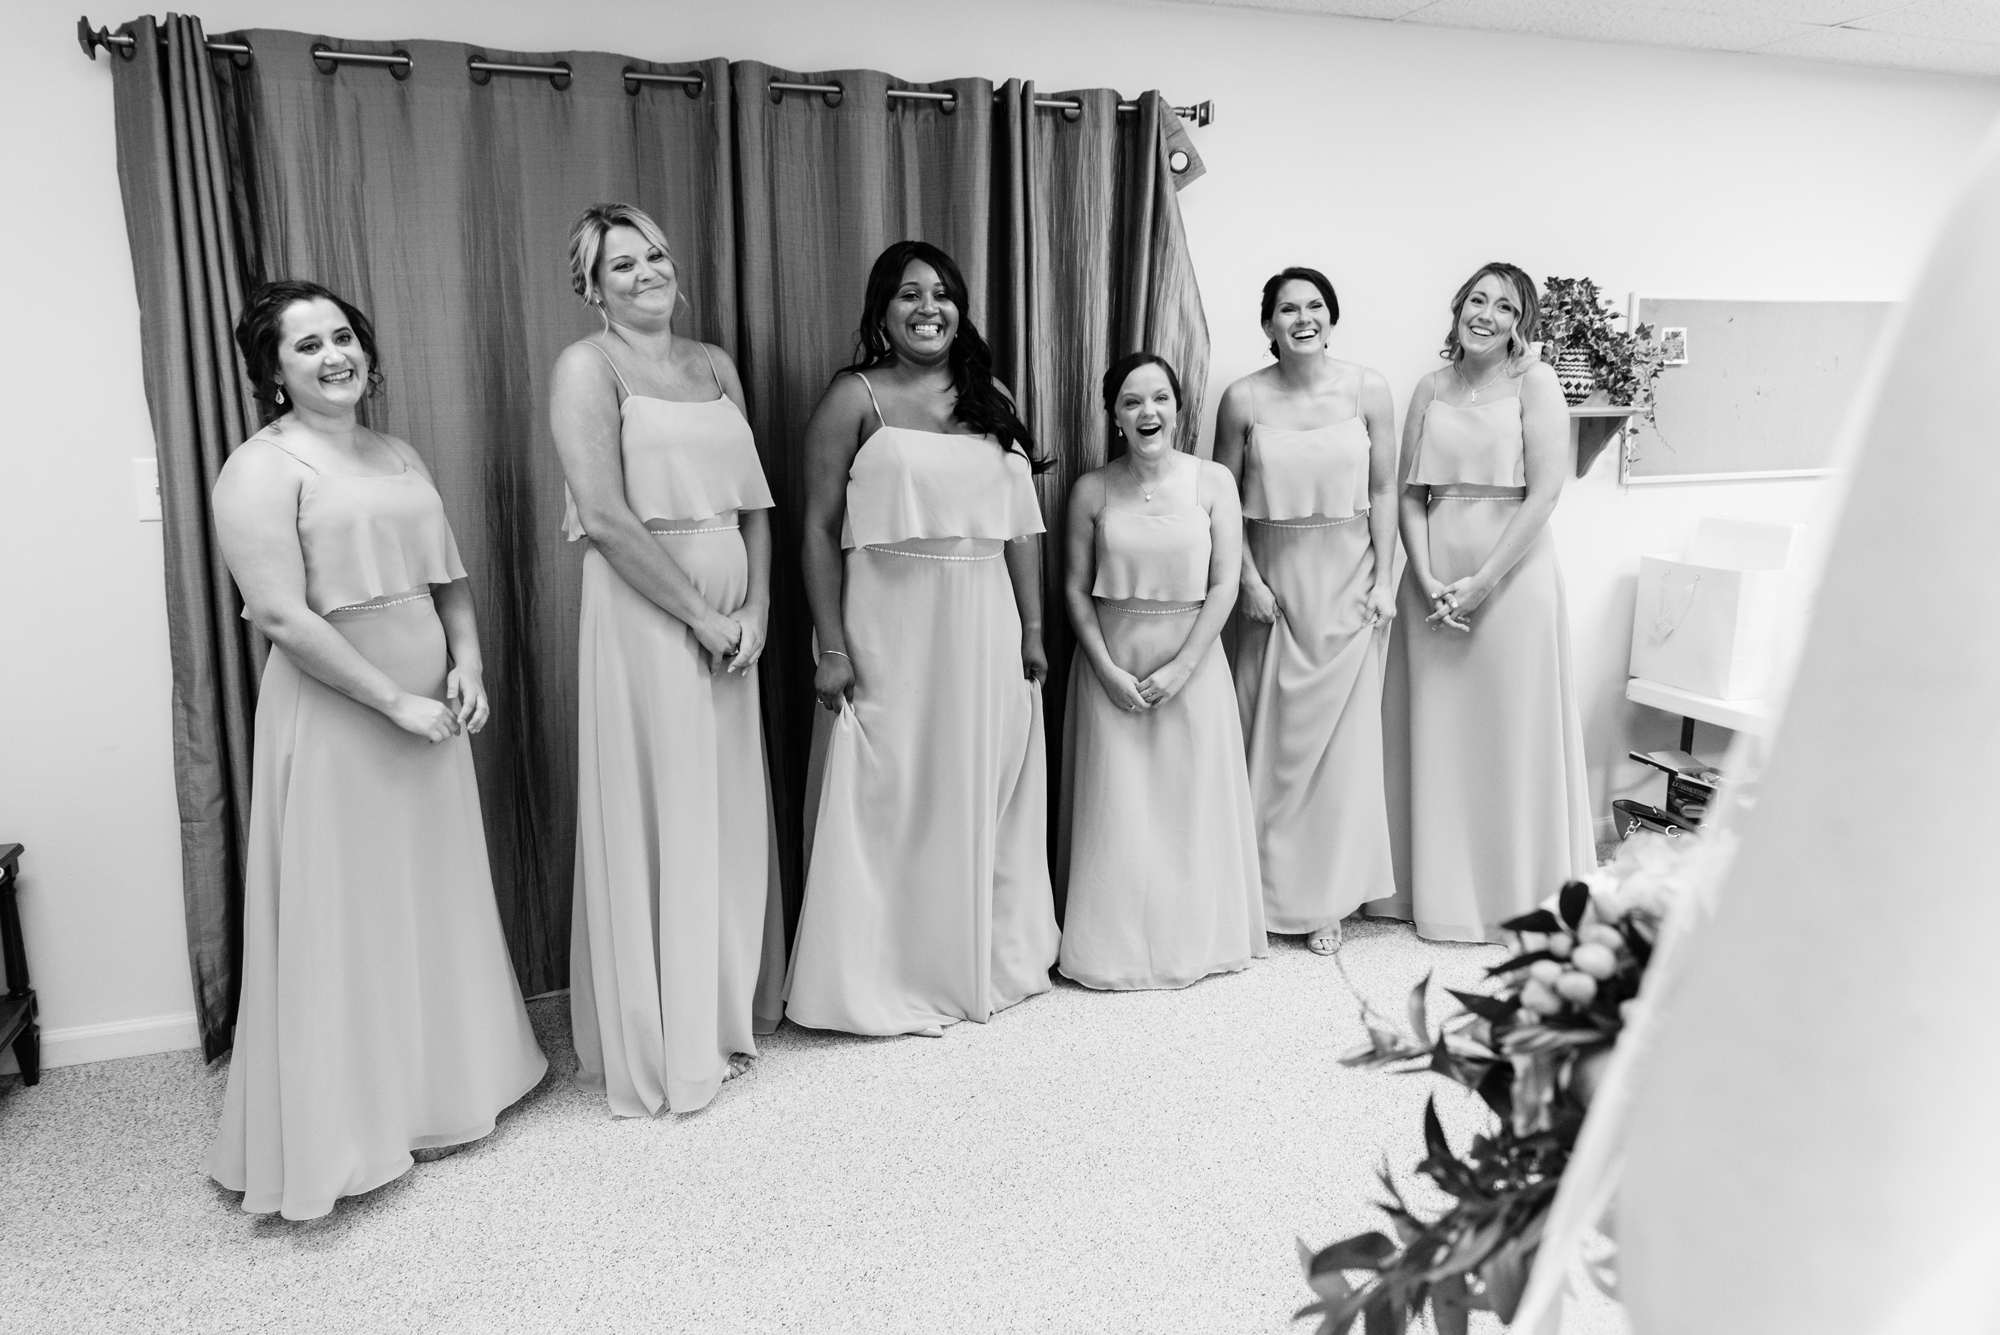 Bridesmaid reveal before a wedding ceremony at Christ the King Lutheran Church